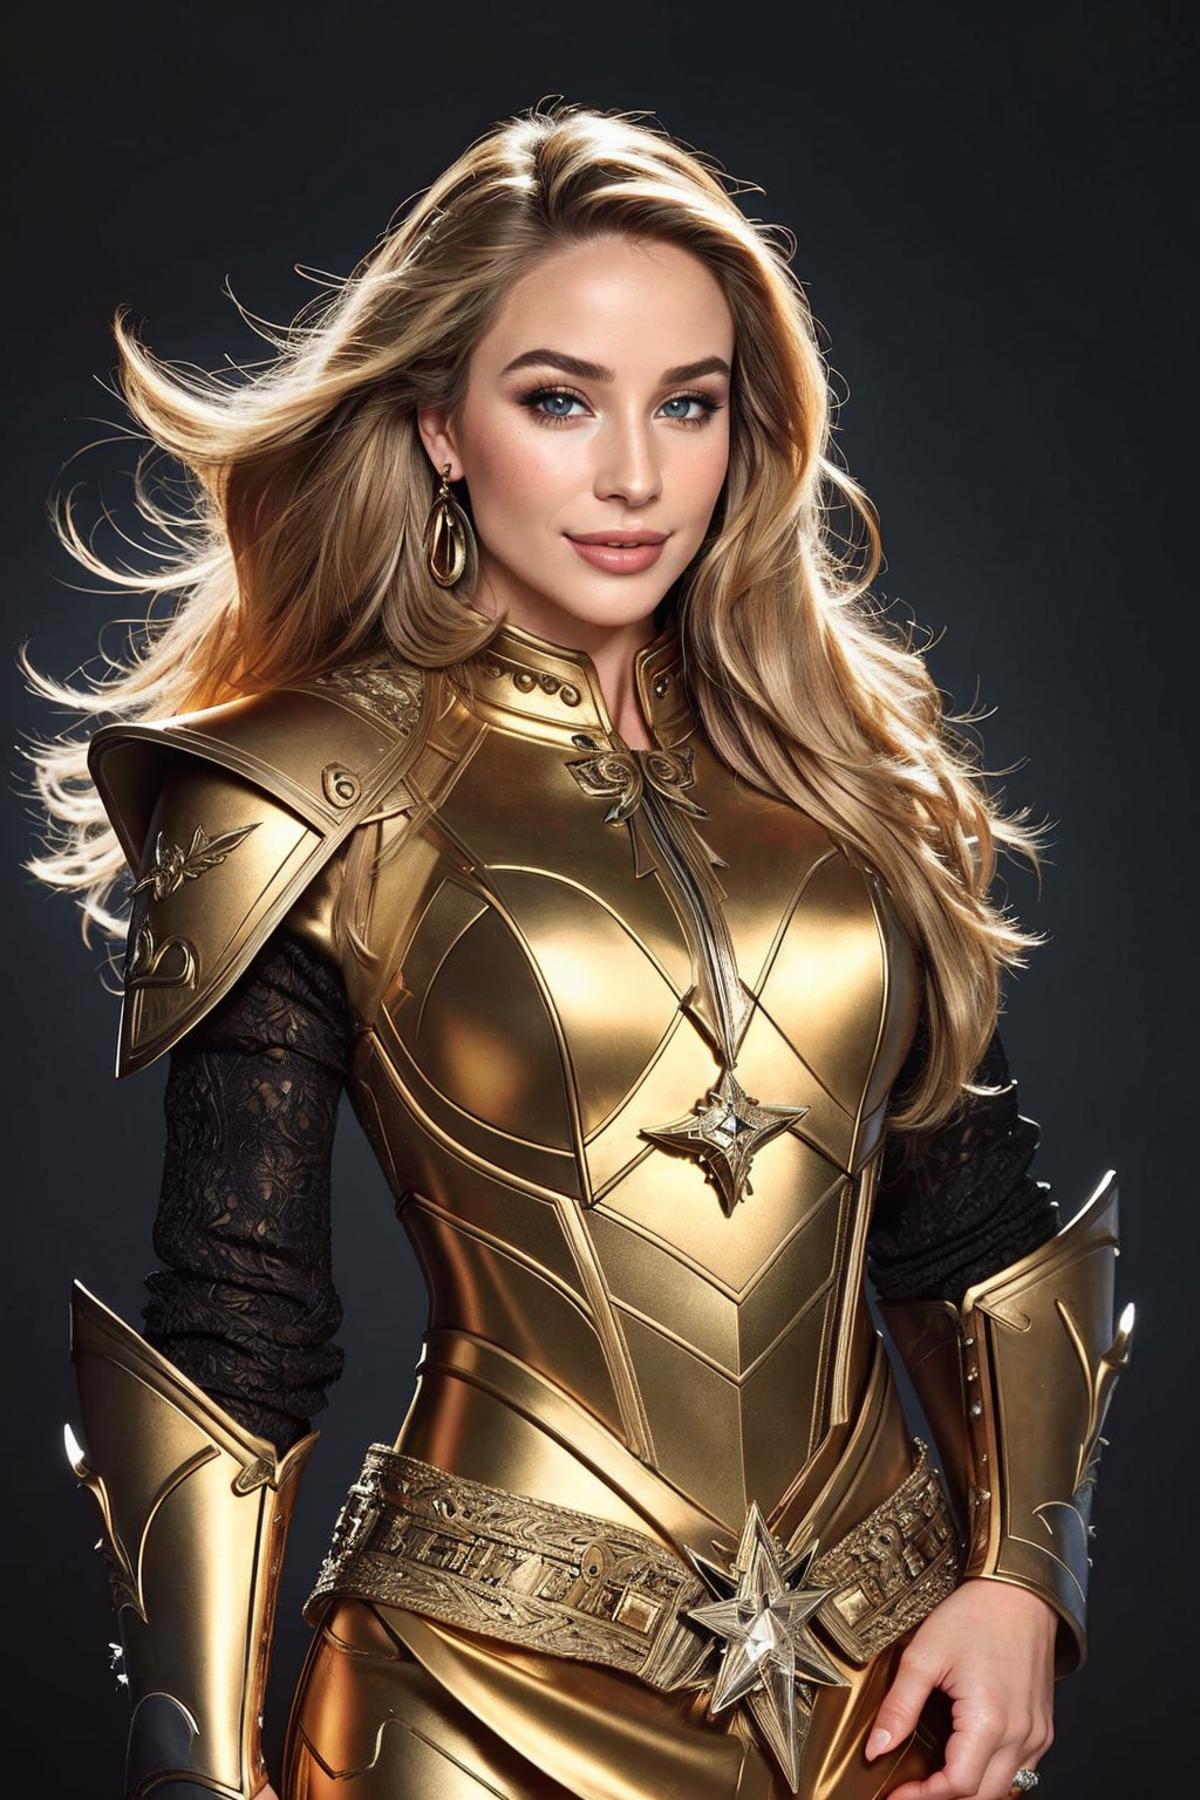 A blonde woman wearing a golden armored costume, including a chainmail dress, and posing for a photo.